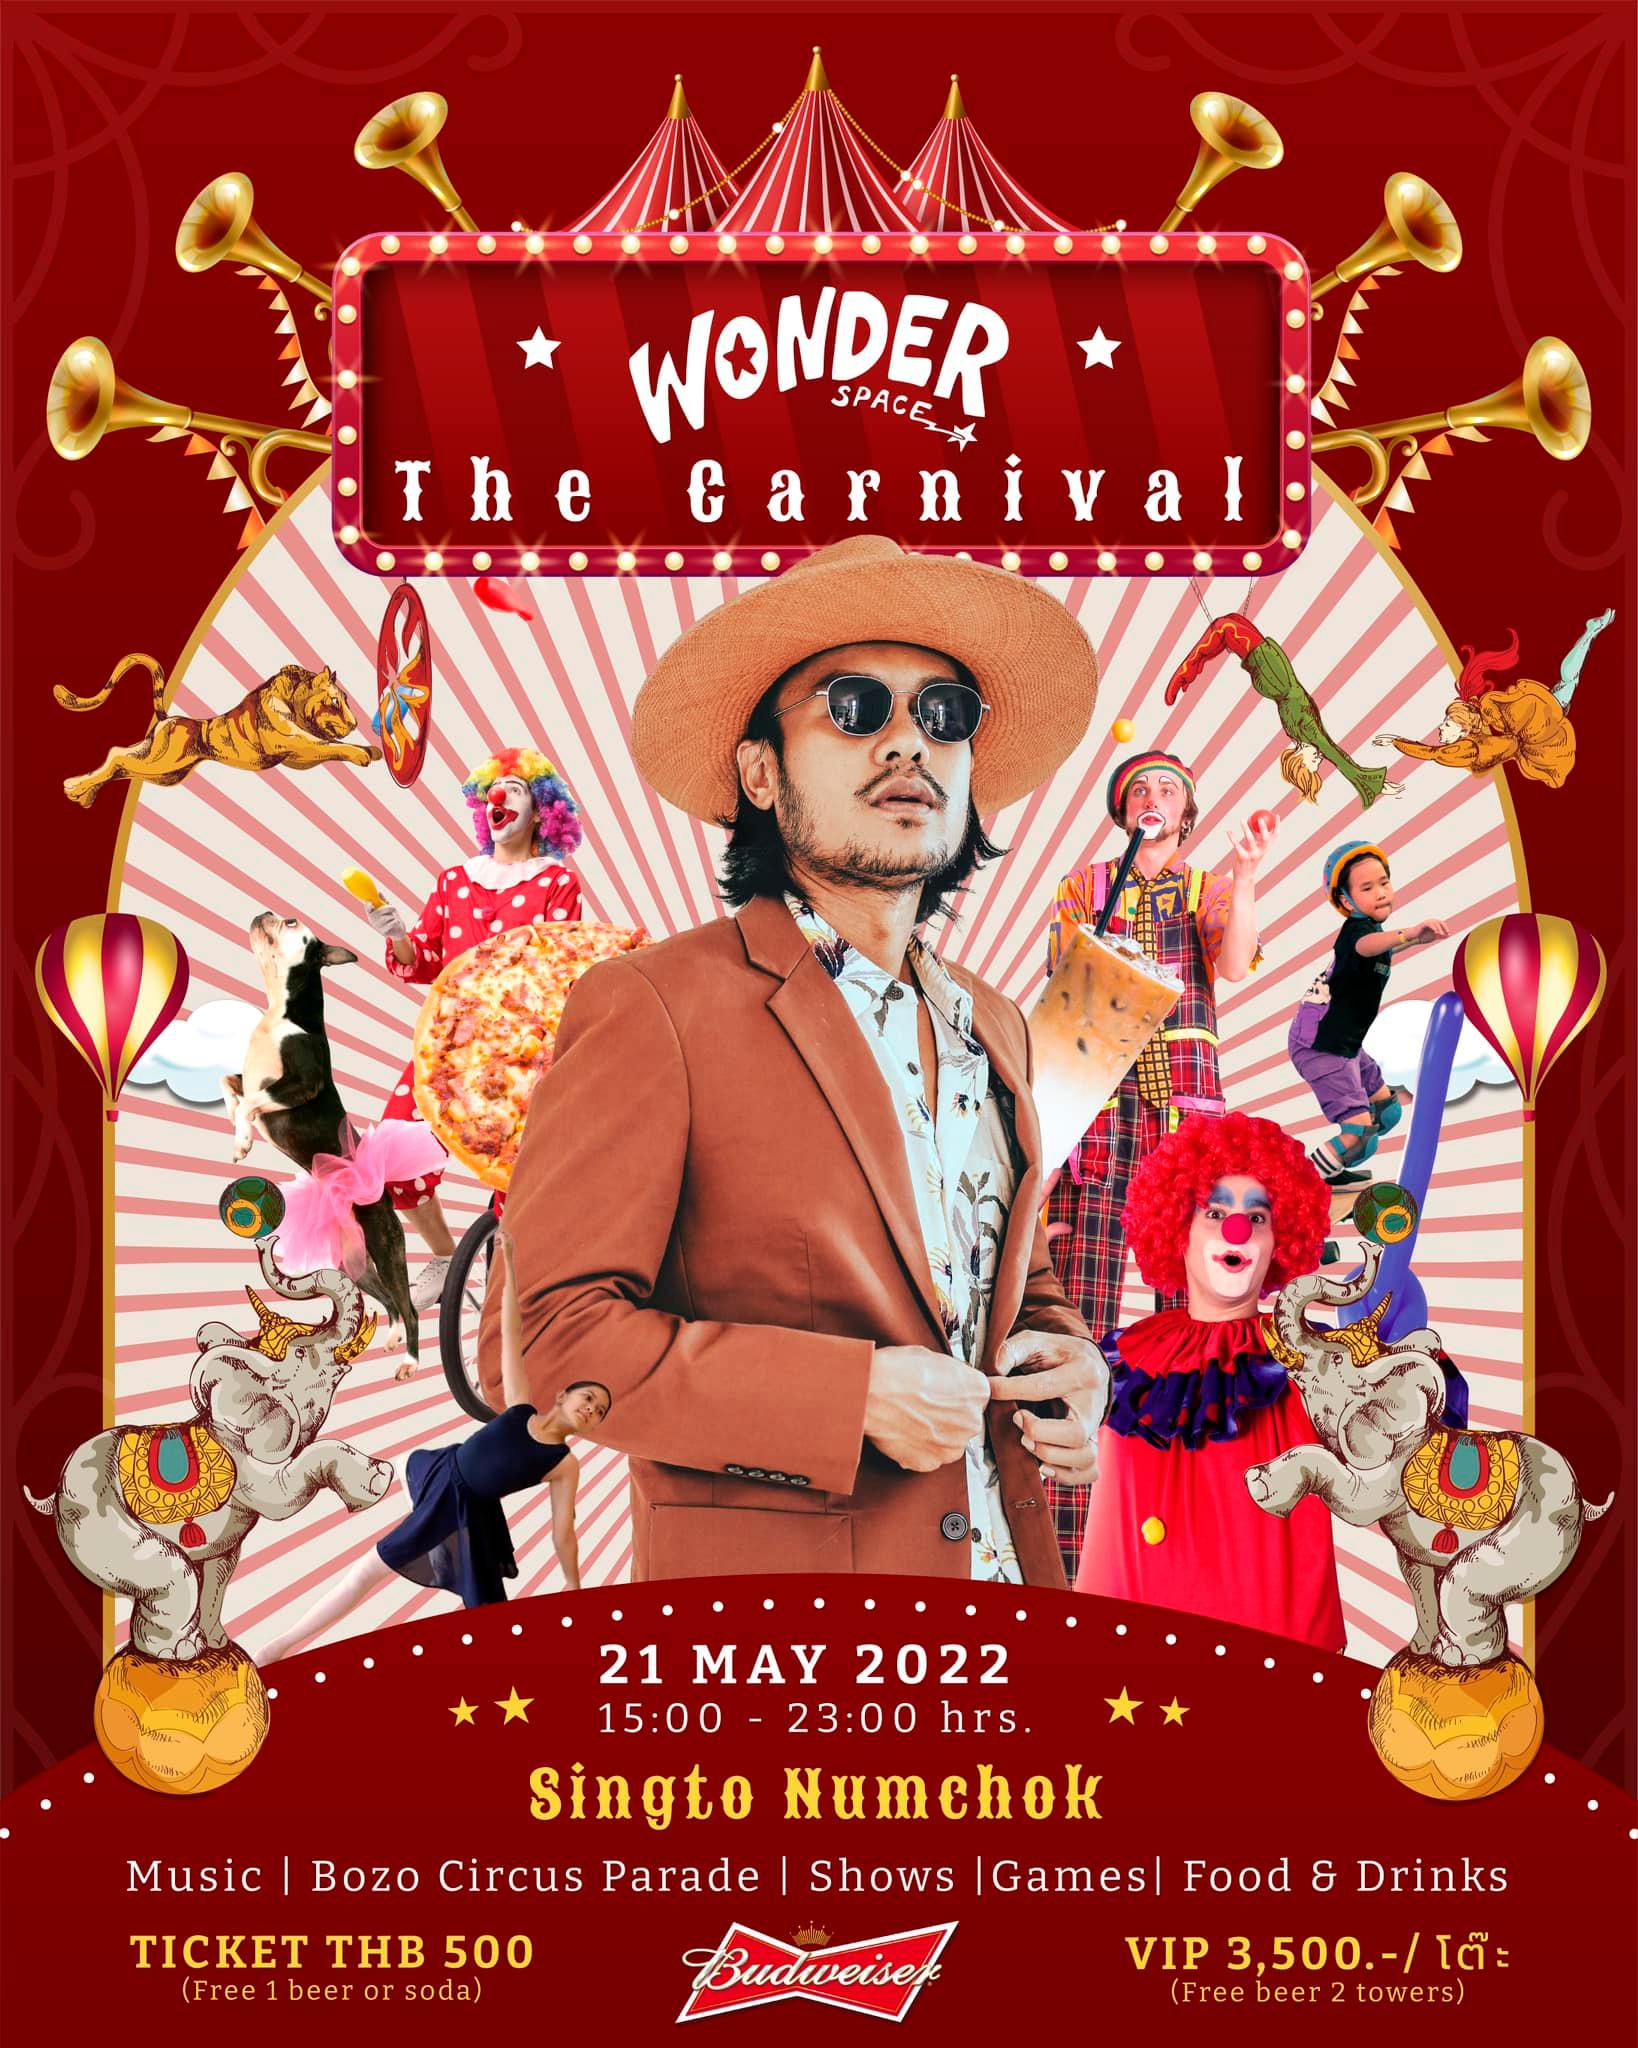 Wonder Space Pattaya to host “The Carnival” on May 21st